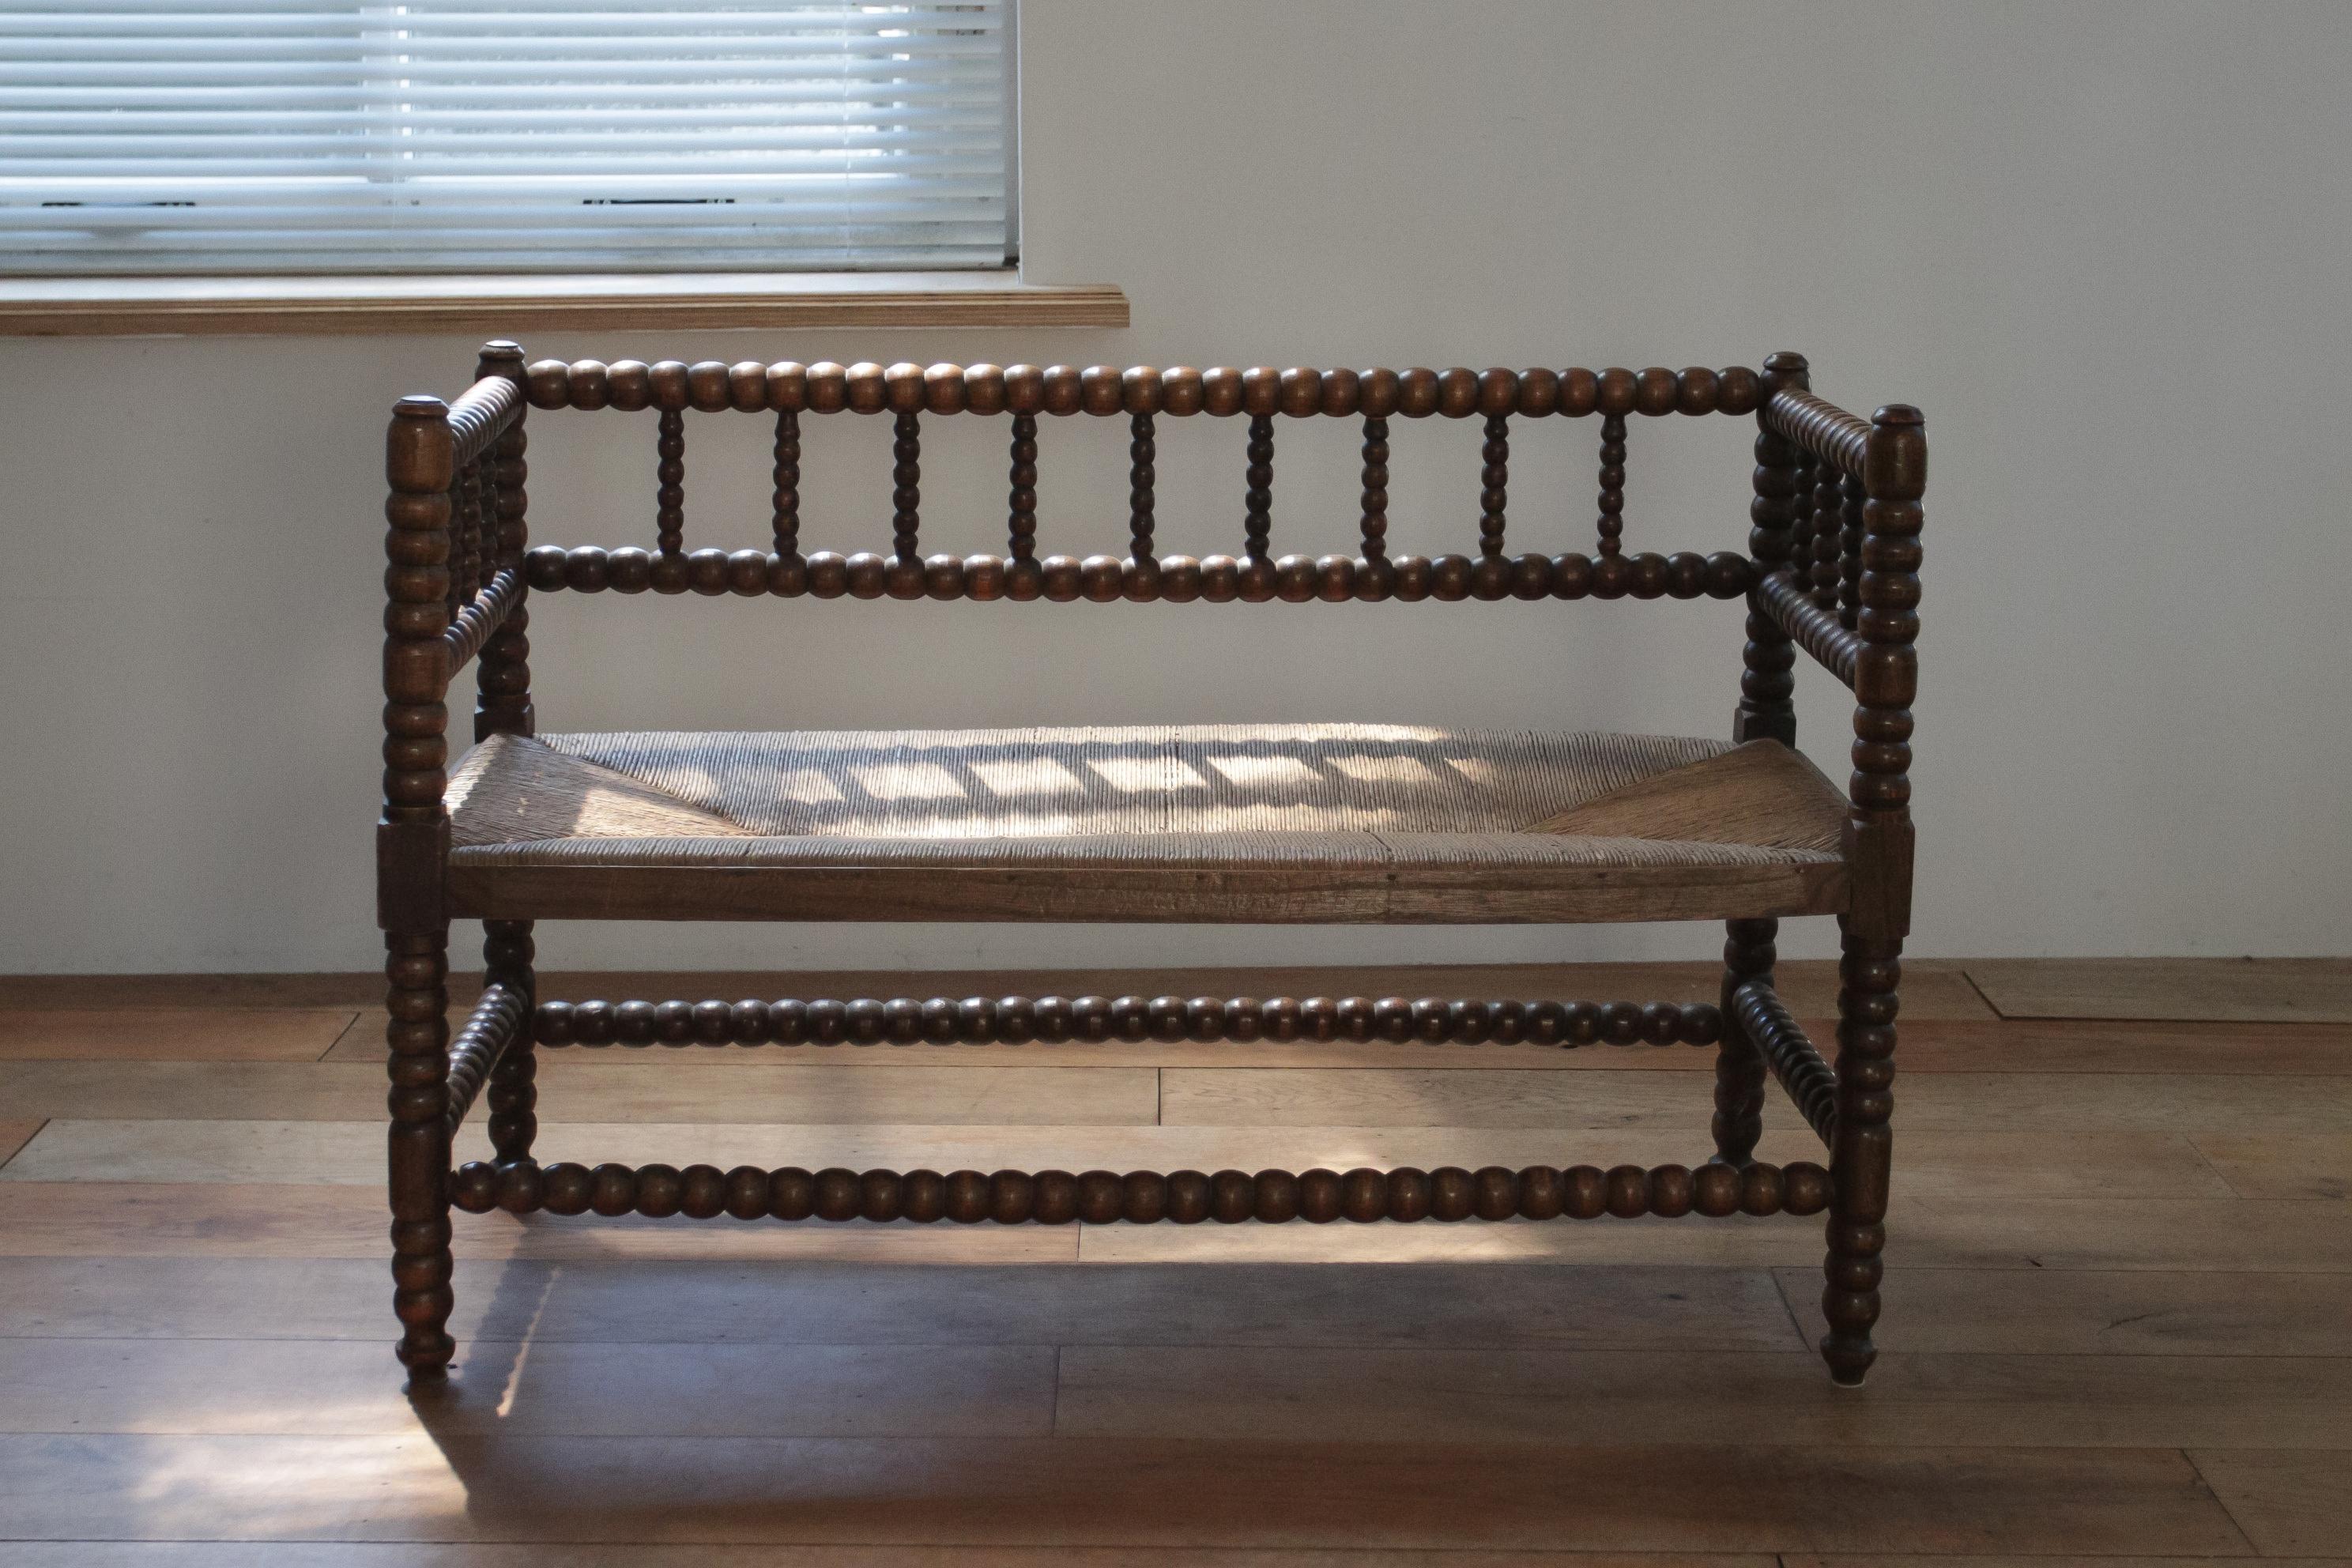 Presenting our Antique Bobbin Bench, a classic piece from the 19th century, crafted with the finest attention to detail. Originating from England, this bench showcases the traditional woodworking technique of bobbin turning, renowned for its